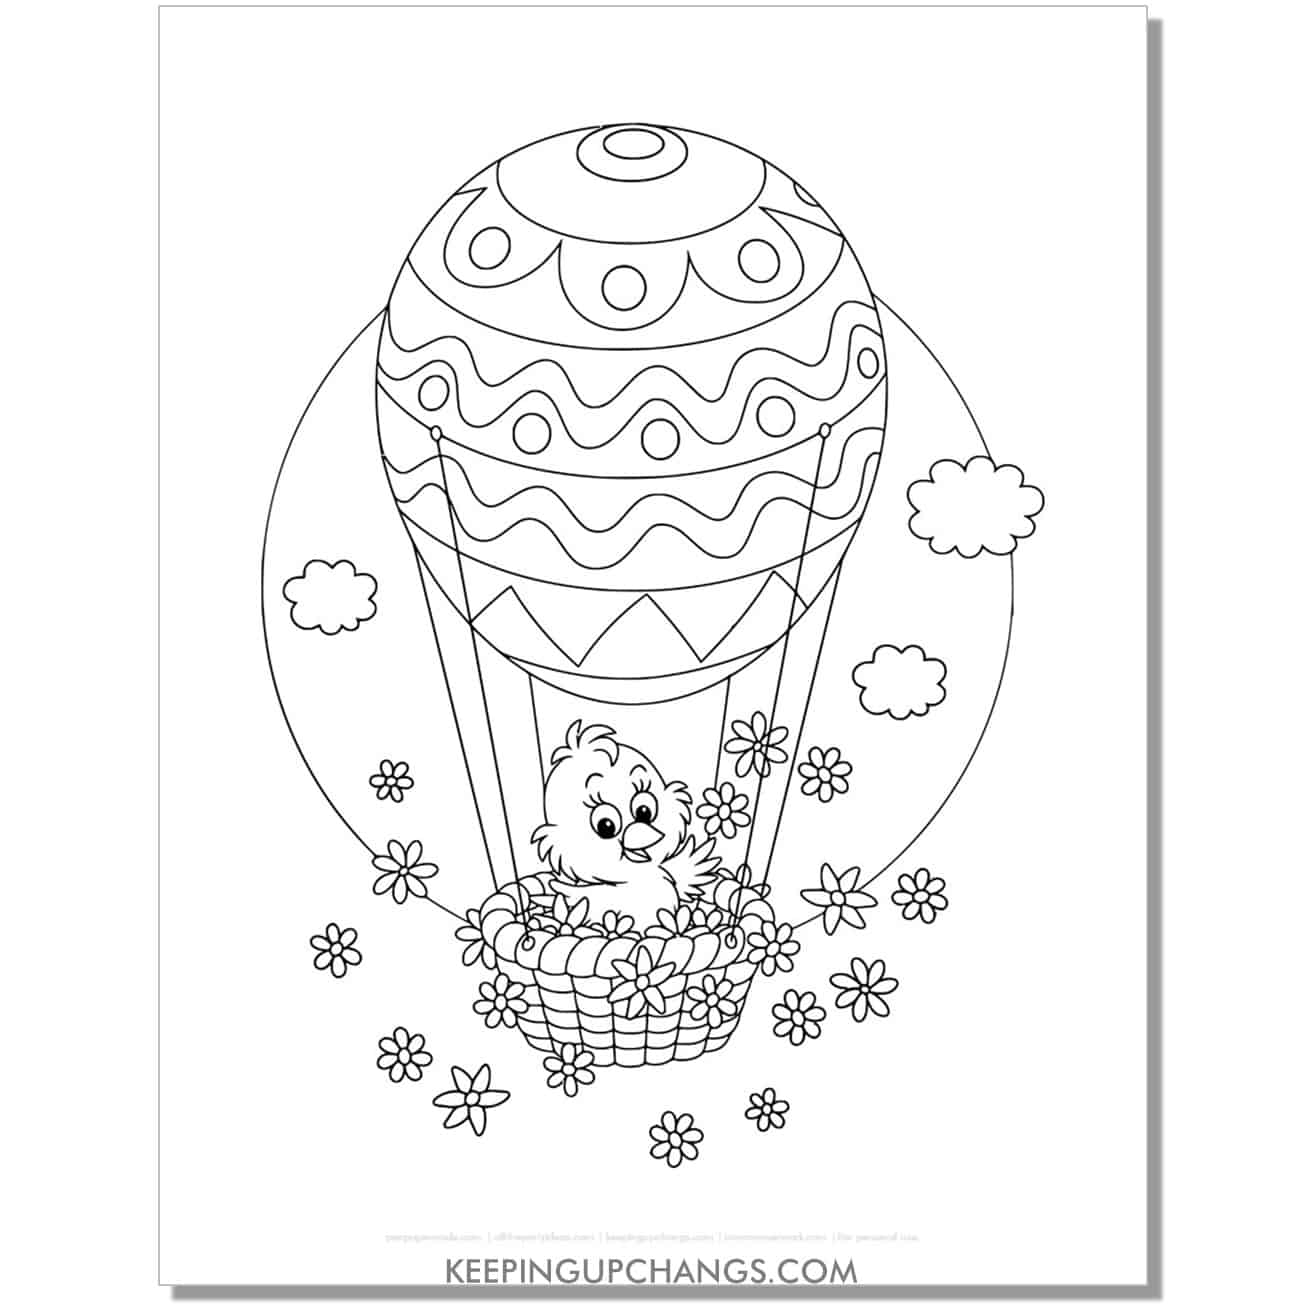 Adorable chick riding in Easter egg hot air balloon coloring page, sheet.